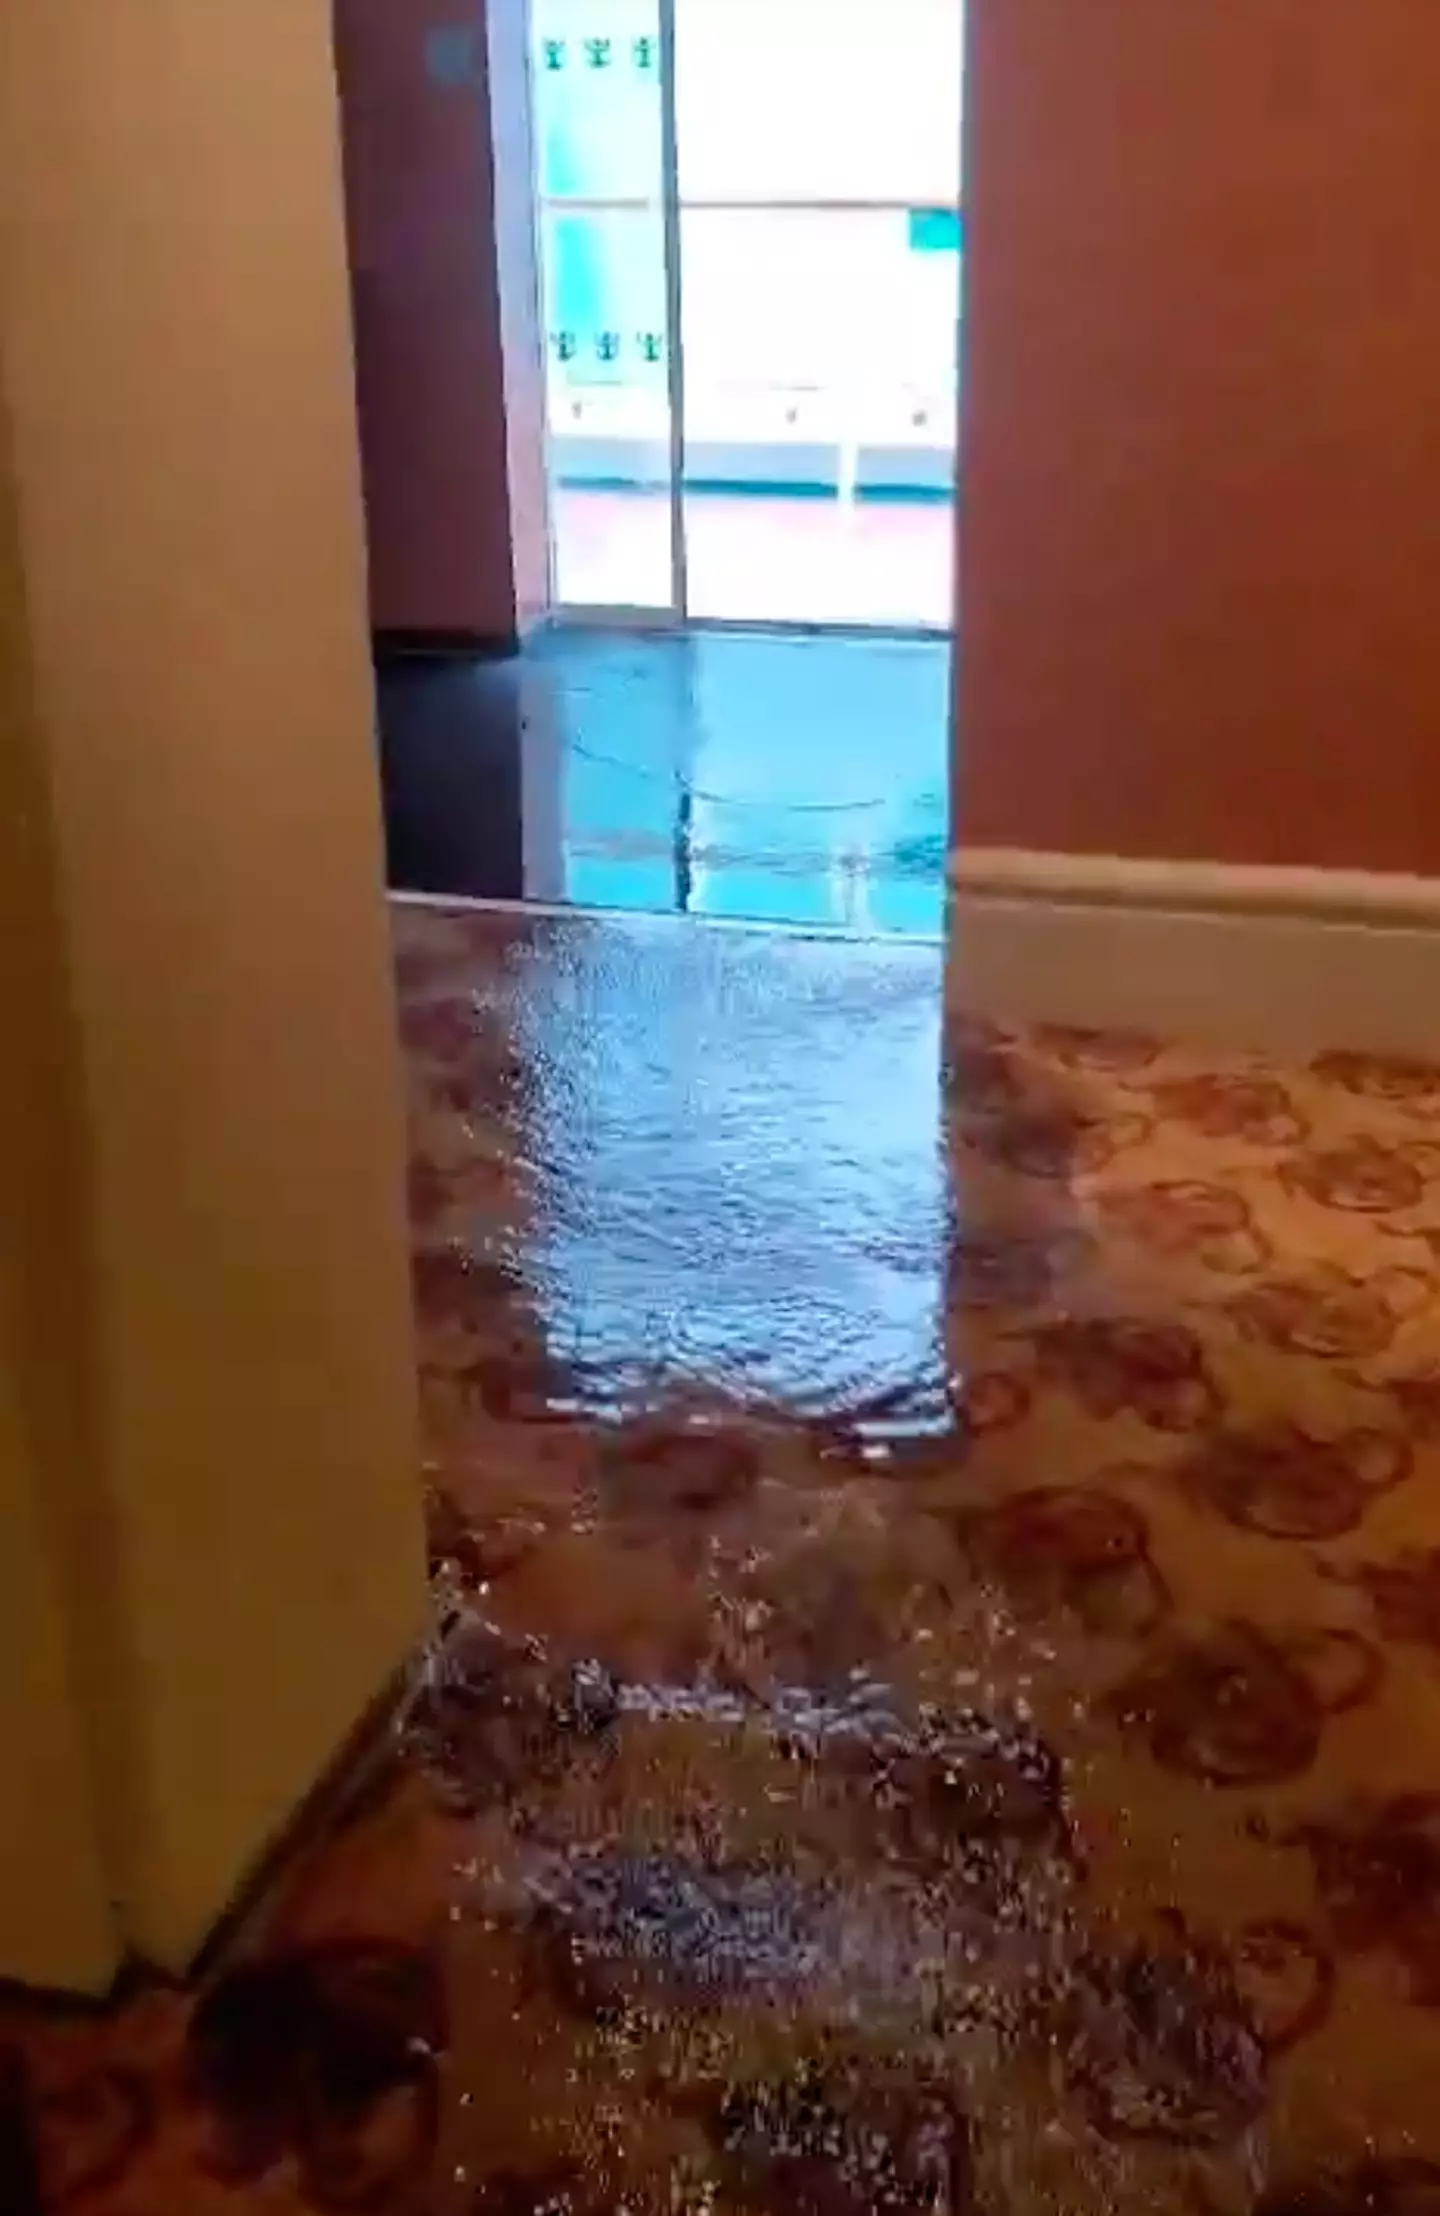 Passengers have been sharing videos of the flood online.